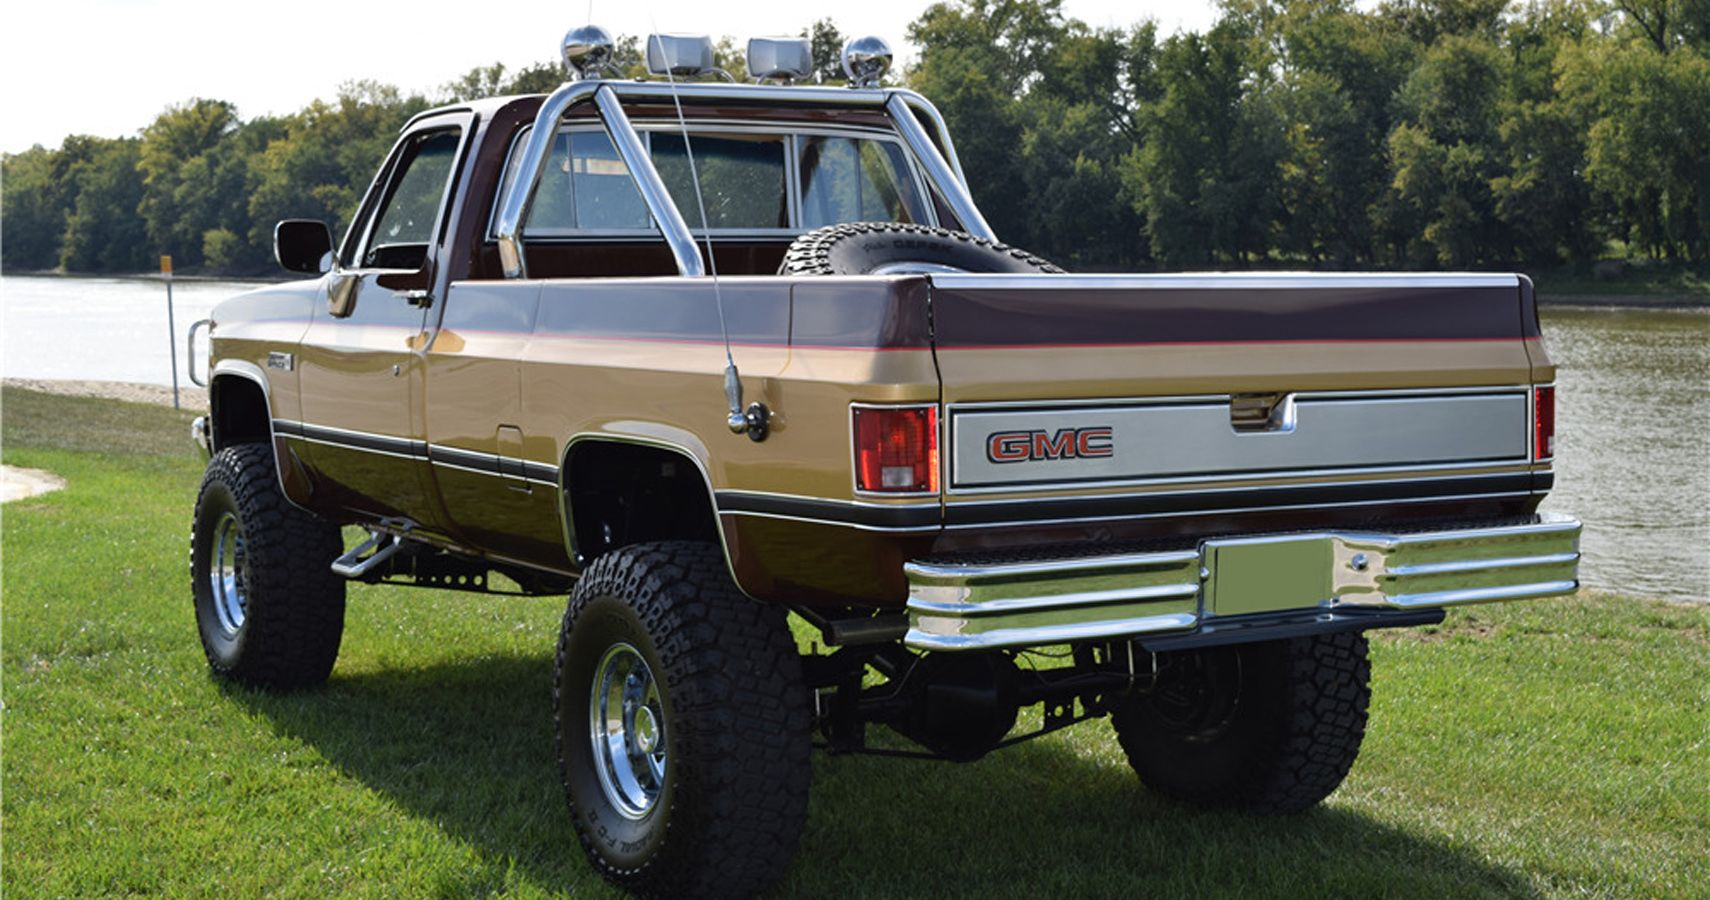 A Recent Replica Of The Fall Guy Truck, Built By Members Of The Vincennes University Auto Club Sold At A Barrett-Jackson Auction For A Cool $50,000